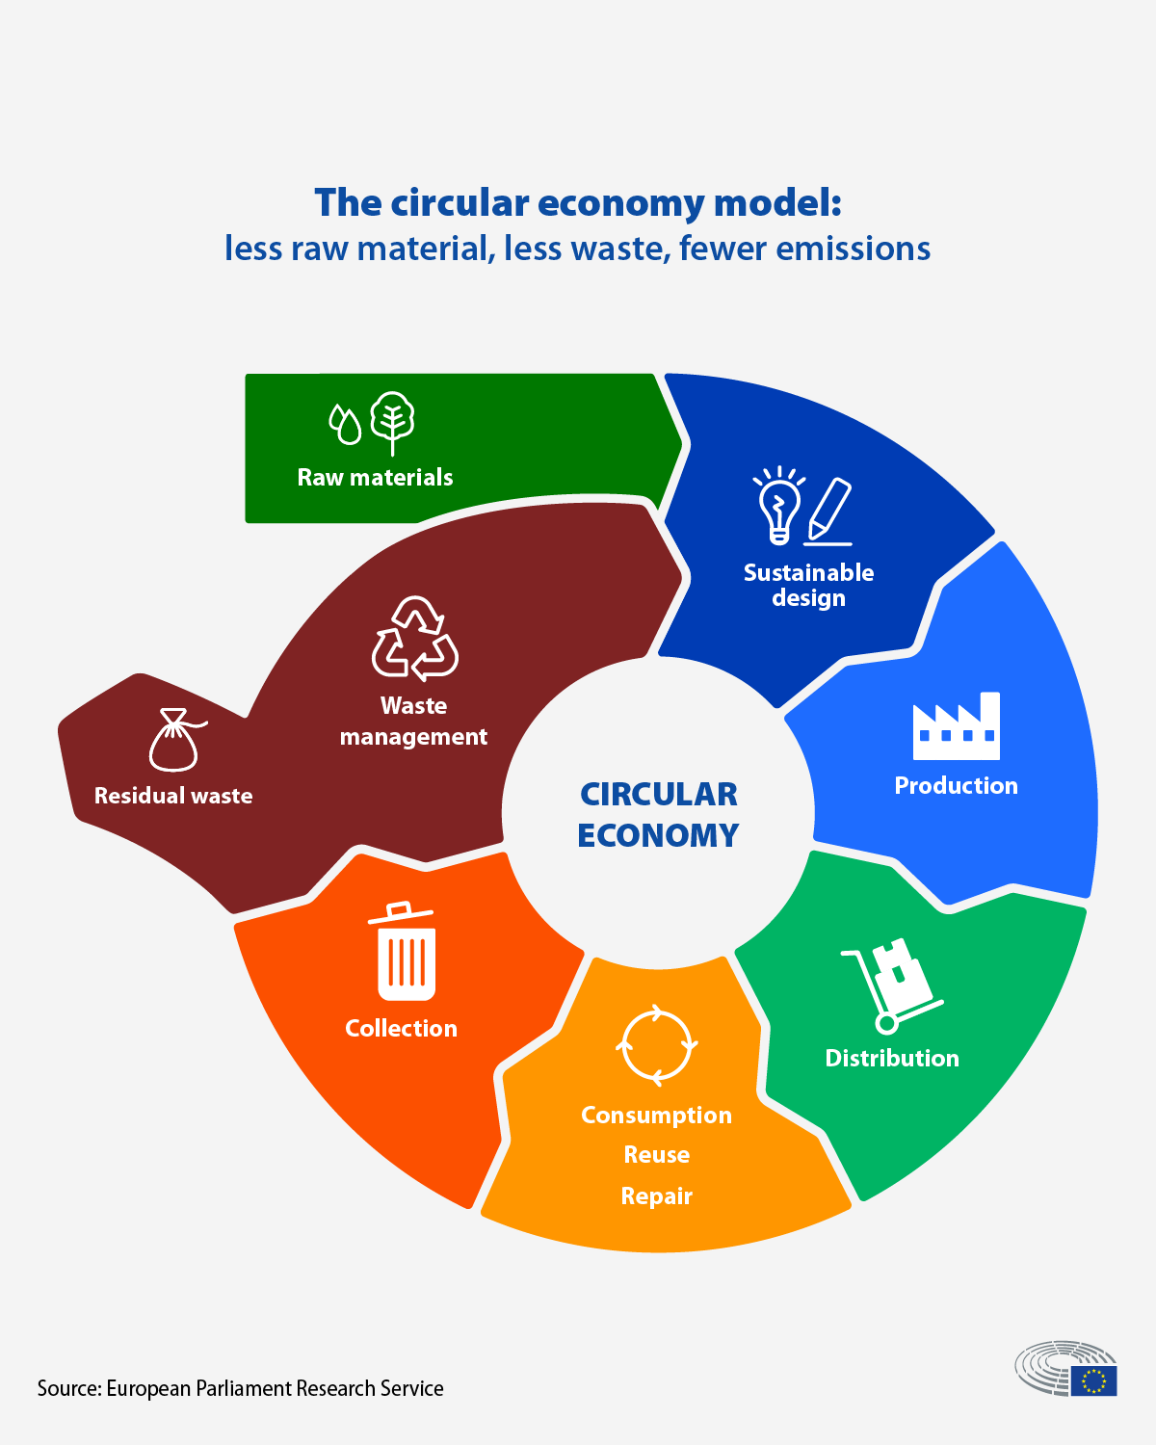 Image showing the circular economy model: less raw material, less waste, fewer emissions